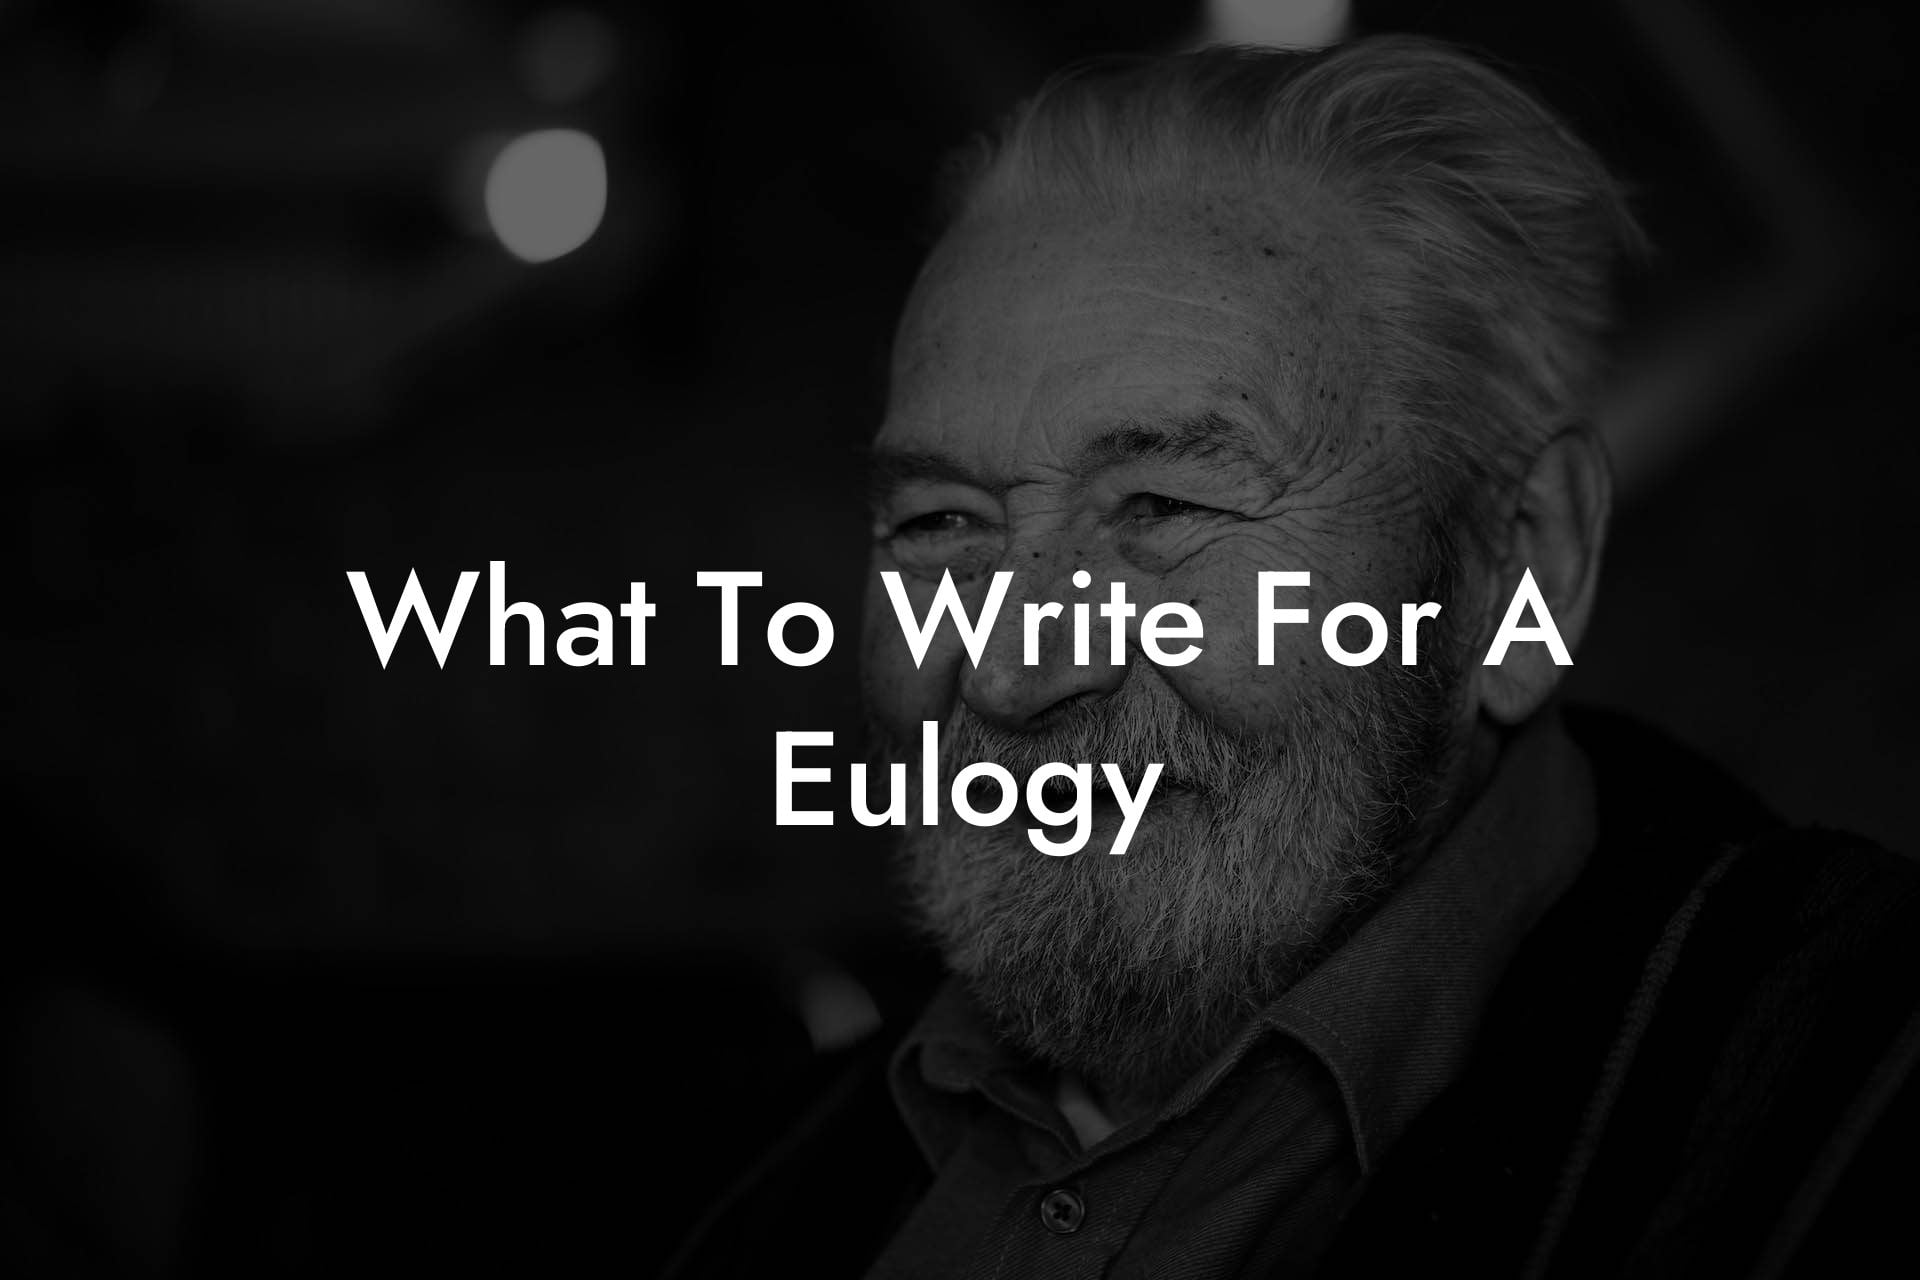 What To Write For A Eulogy